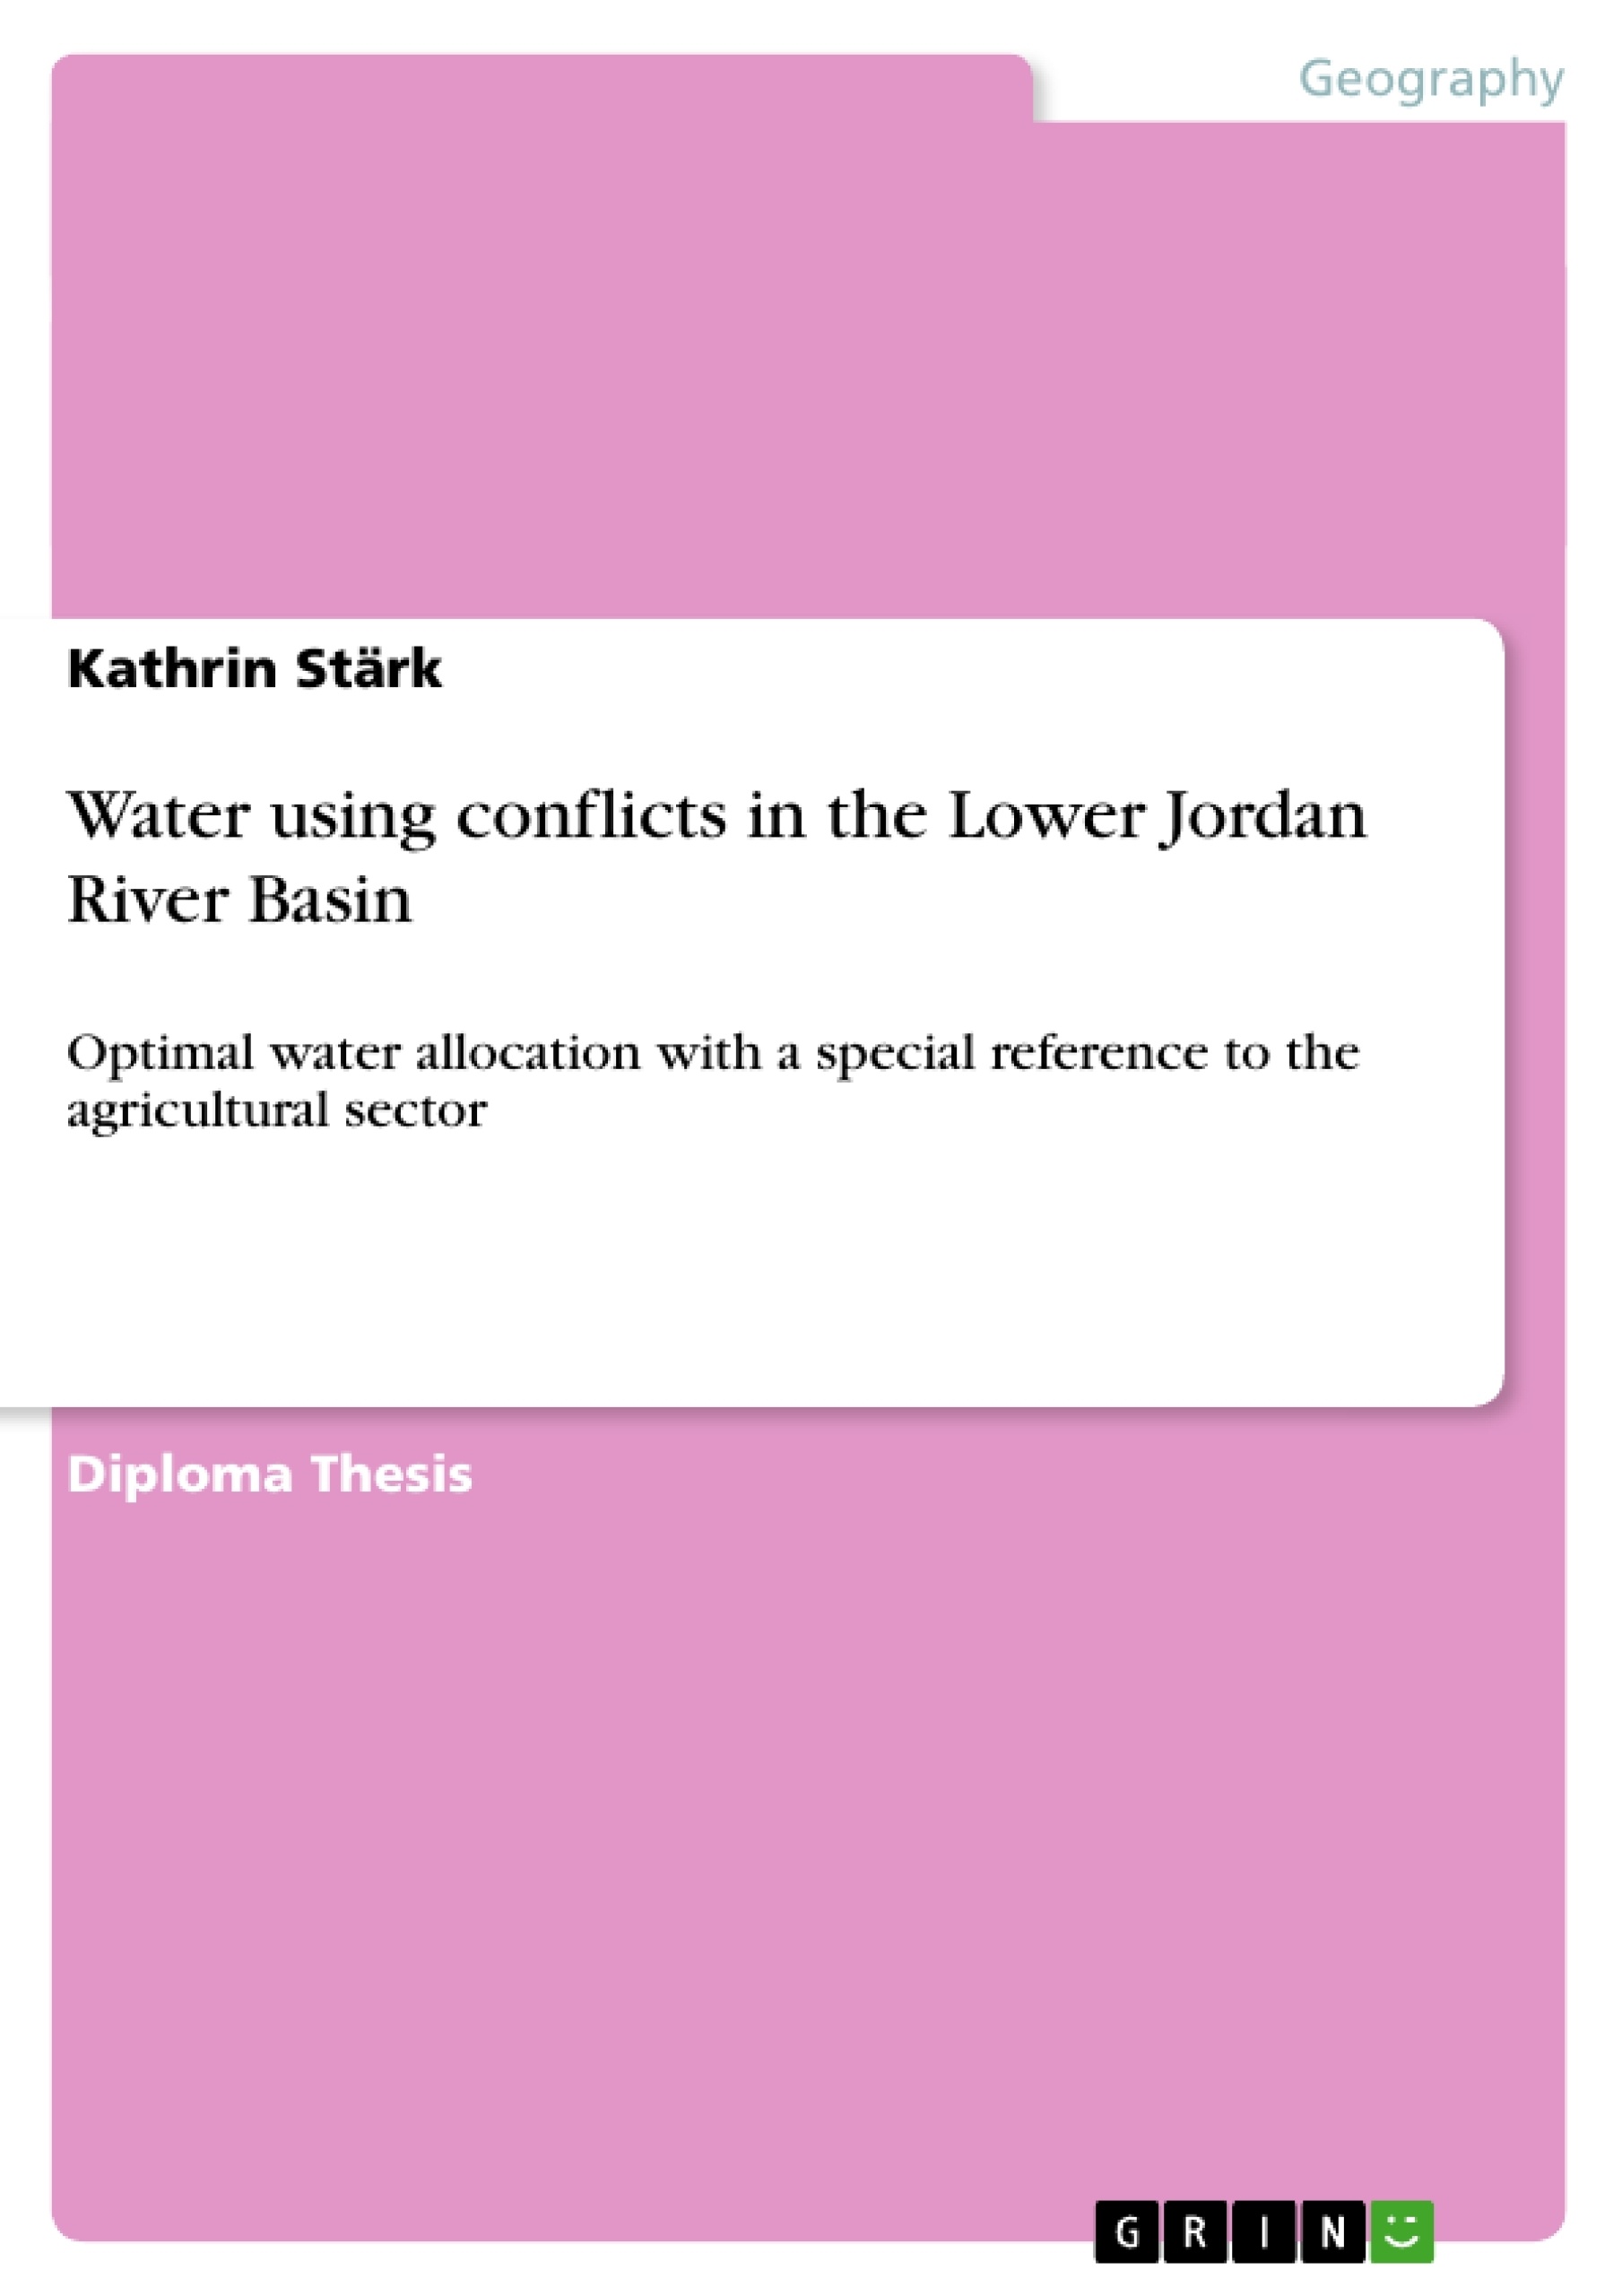 Title: Water using conflicts in the Lower Jordan River Basin